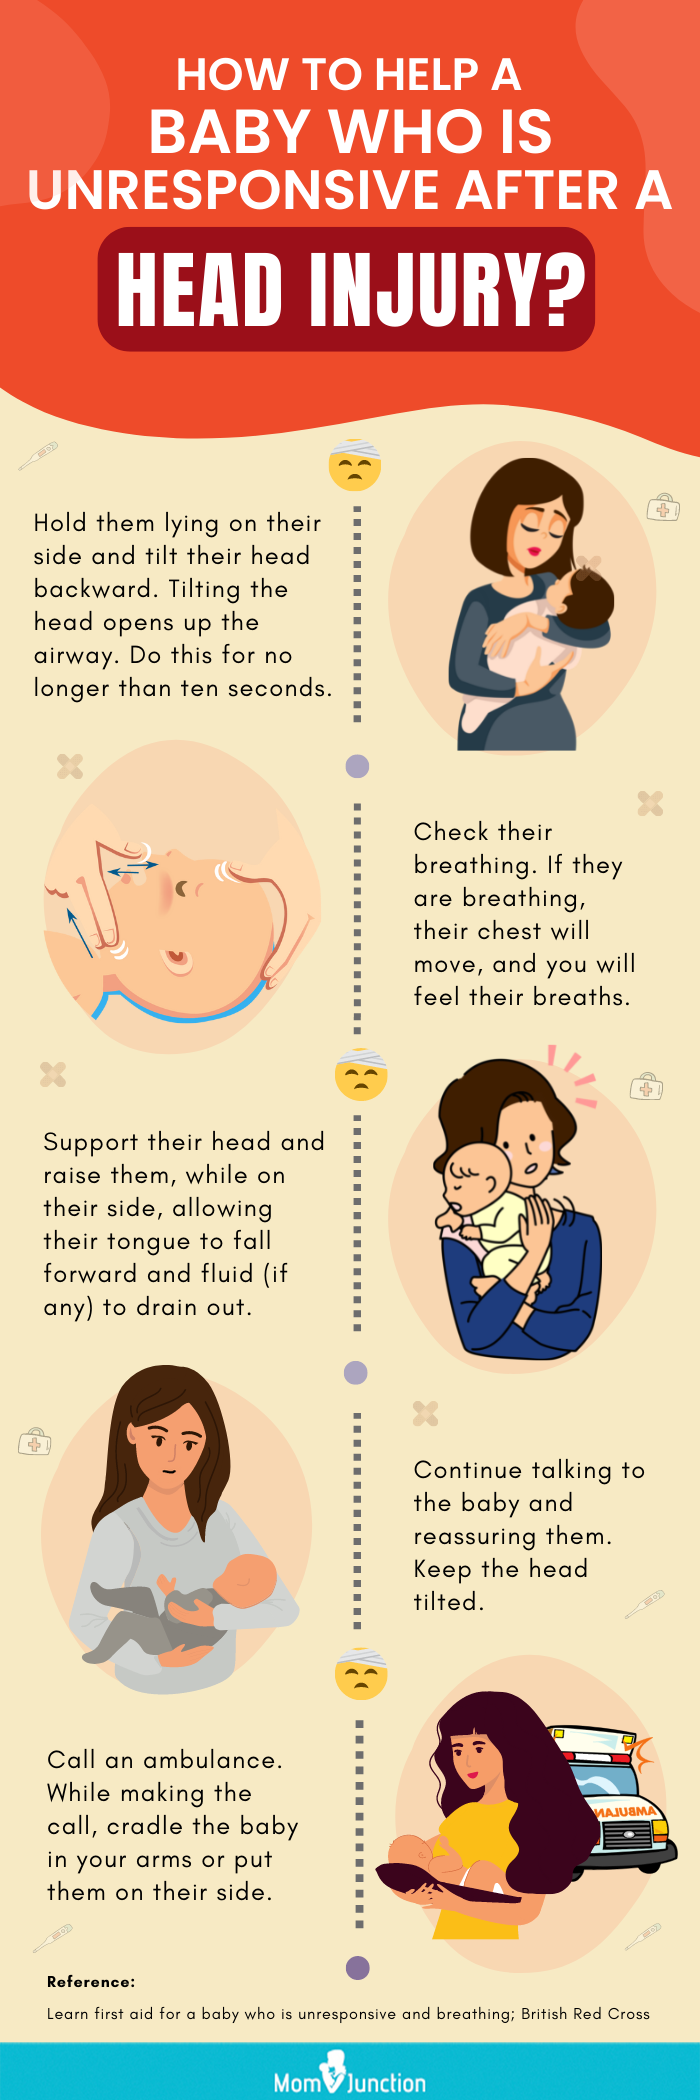 how to help a baby who is unresponsive after a head injury (infographic)